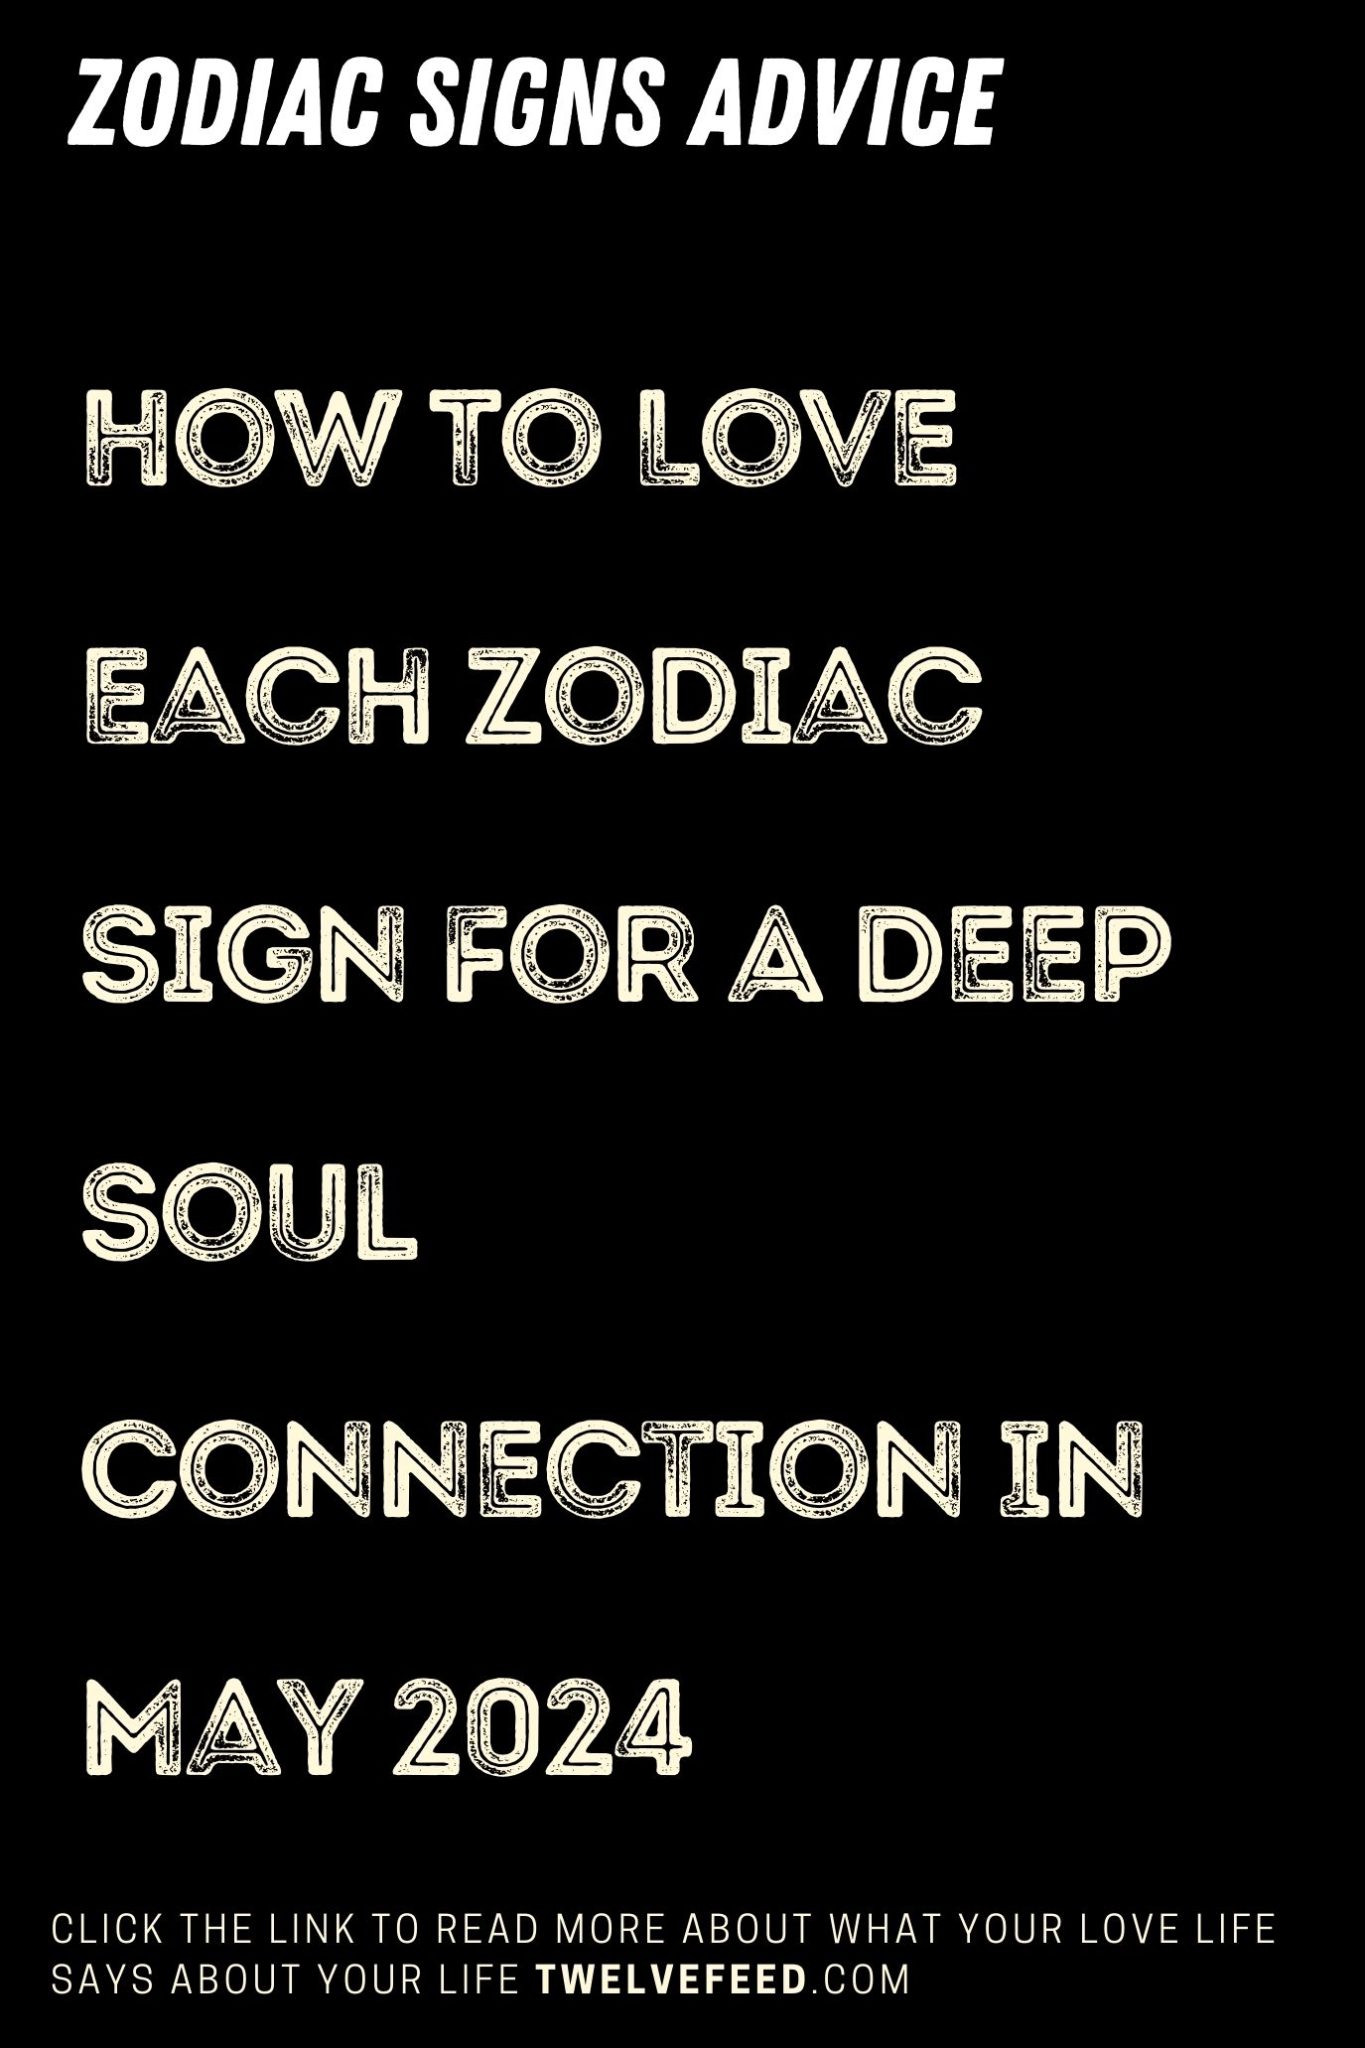 How To Love Each Zodiac Sign For A Deep Soul Connection In May 2024 